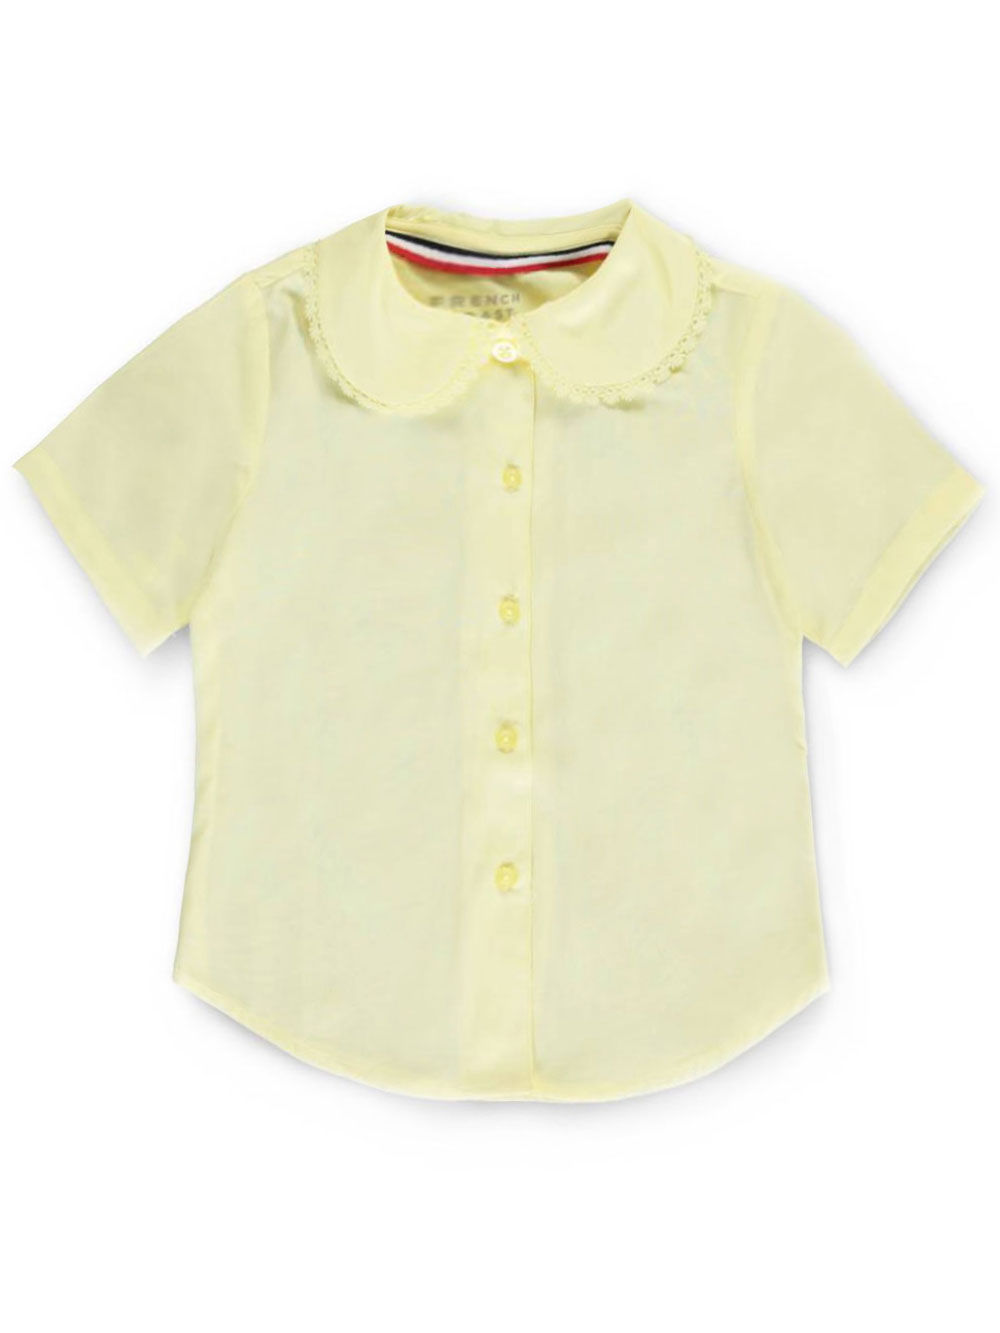 At School by French Toast French Toast Big Girls' S/S Peter Pan Lace Trim Blouse (Sizes 7 - 20)